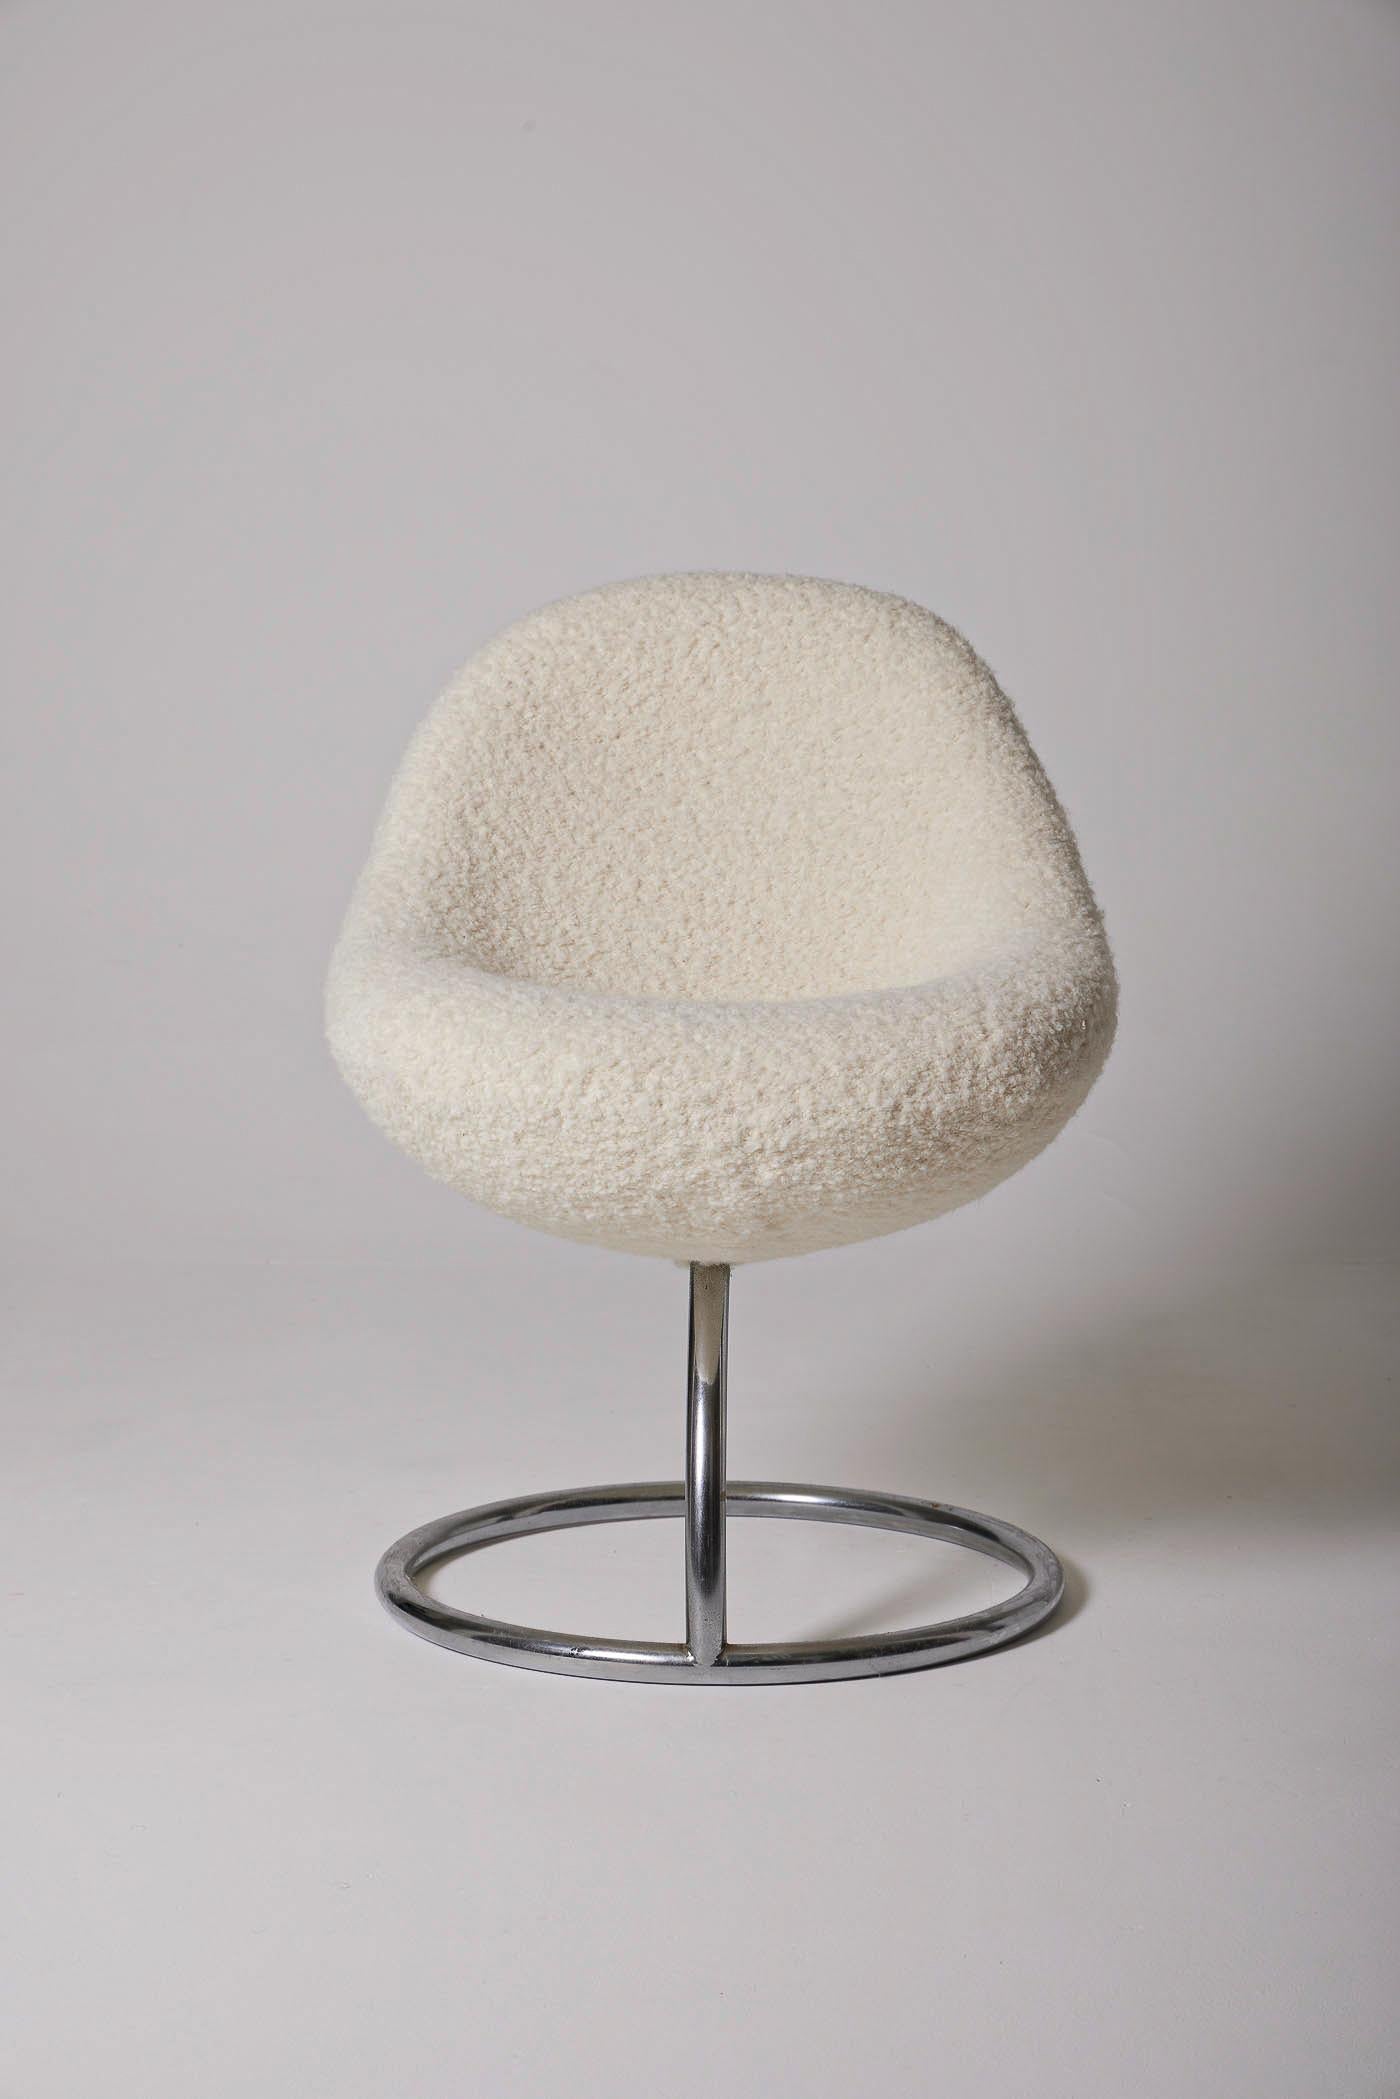 Cocoon chair featuring a bouclé fabric seat and a brushed metal base, from the 1970s. Seat reupholstered in perfect condition. Light signs of wear noted on the base.
DV347